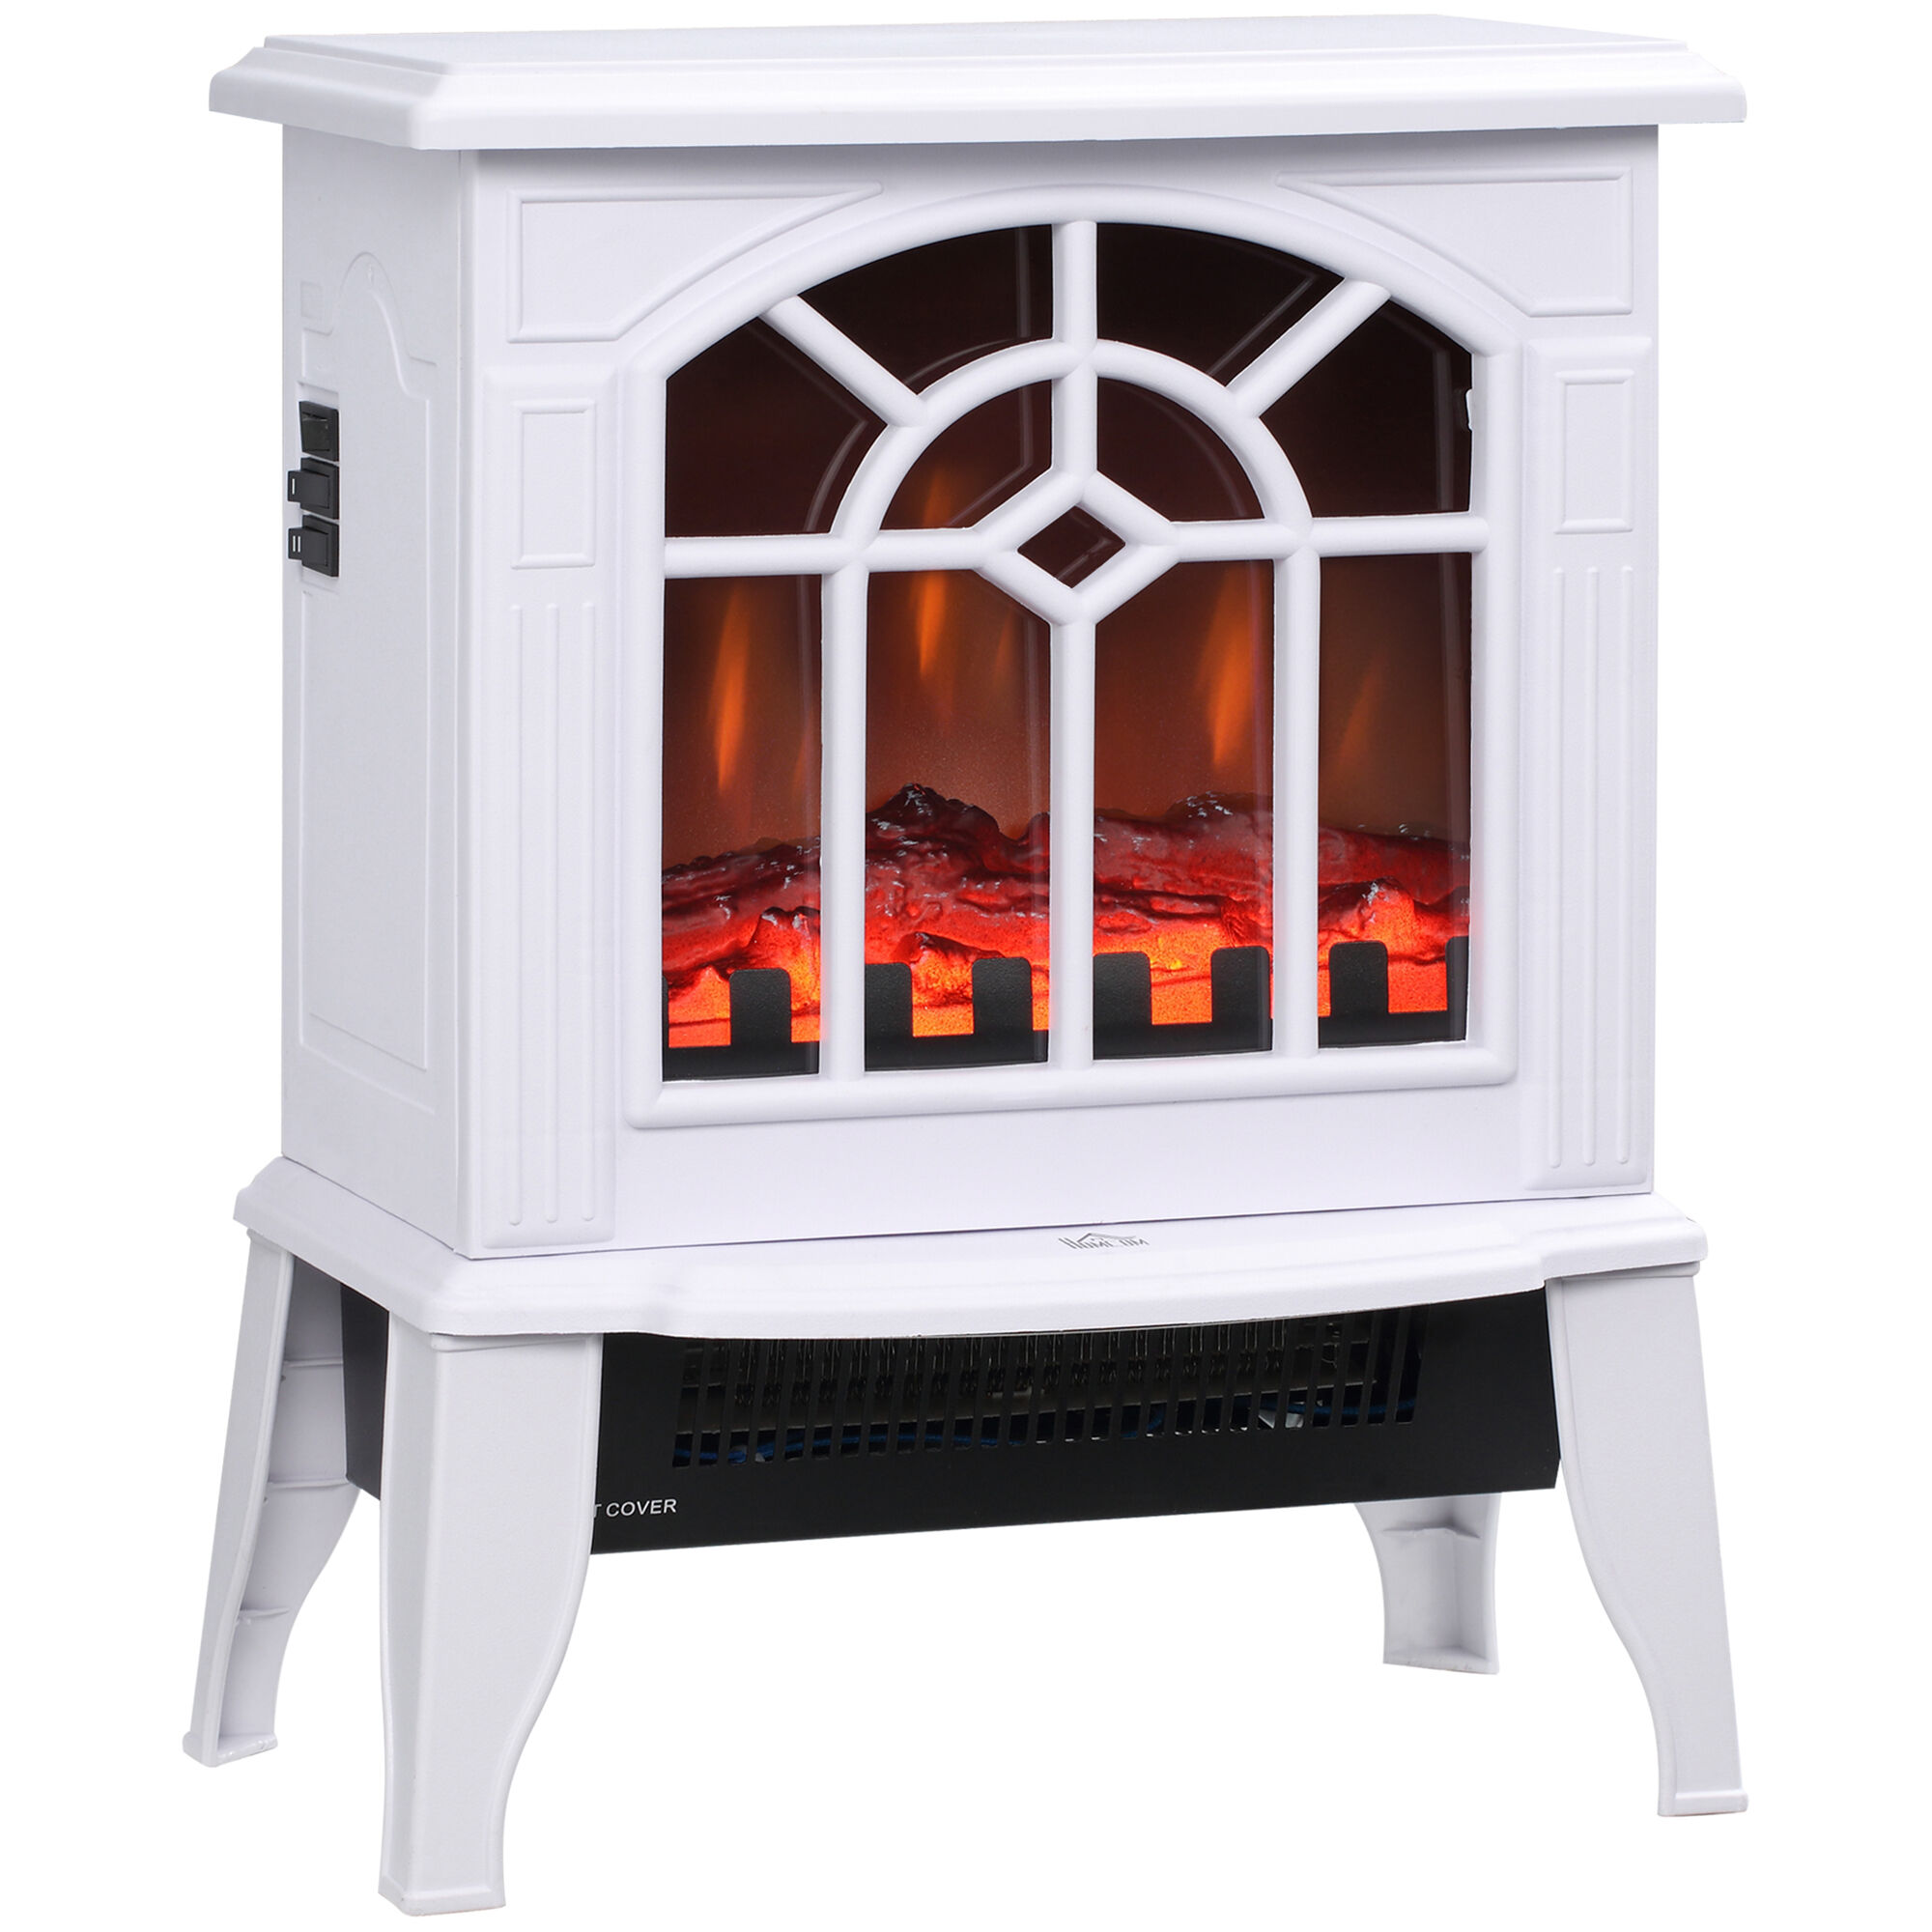 HOMCOM 18 Electric Fireplace Heater White with Realistic LED Flames Logs Overheating Protection 750W/1500W   Aosom.com